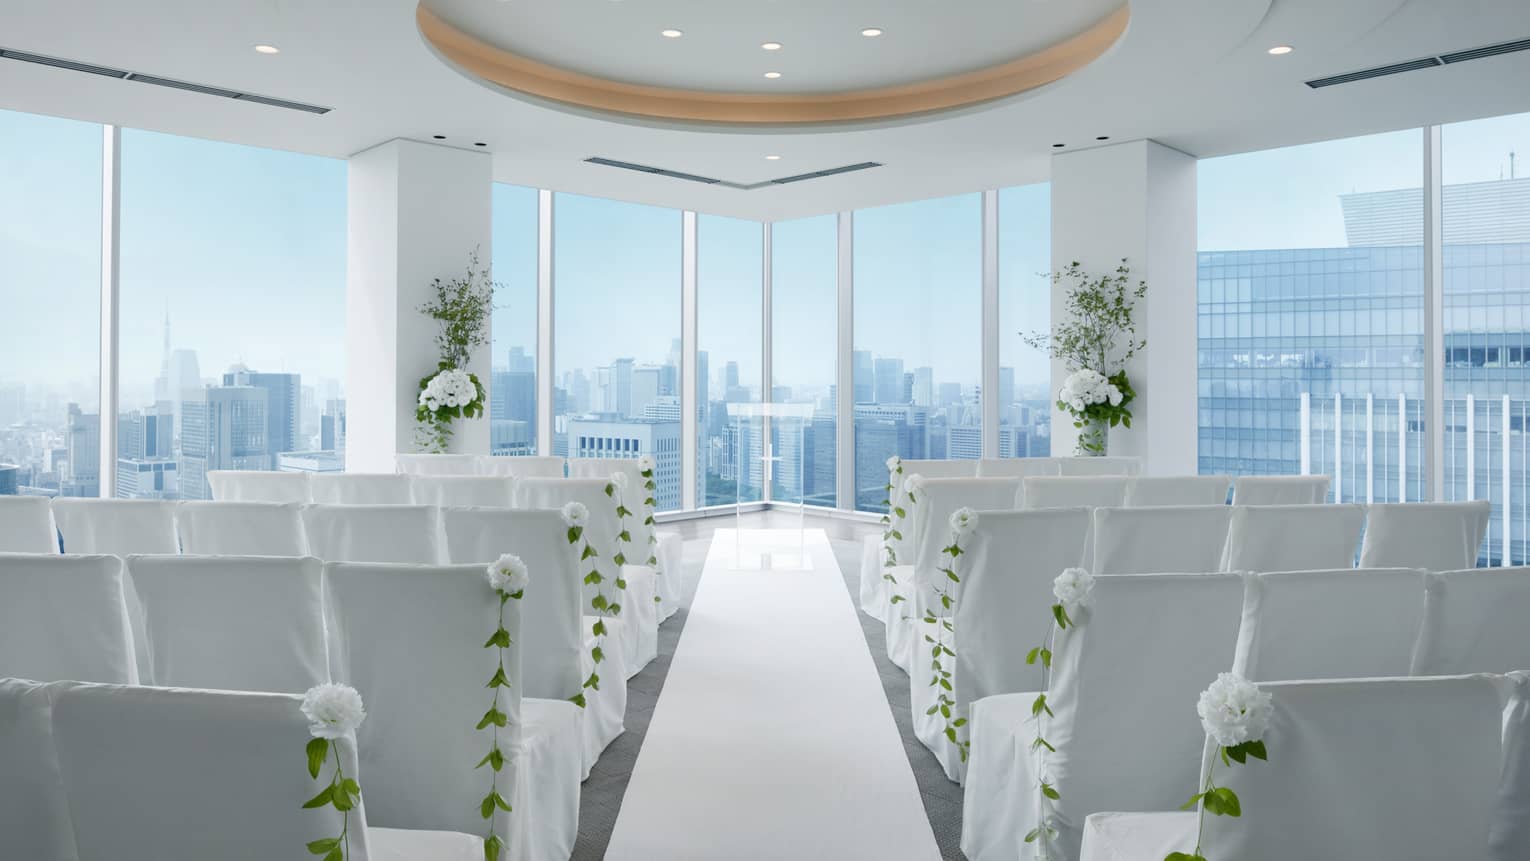 Indoor wedding ceremony, rows of white chairs face ballroom corner windows and raised ceiling